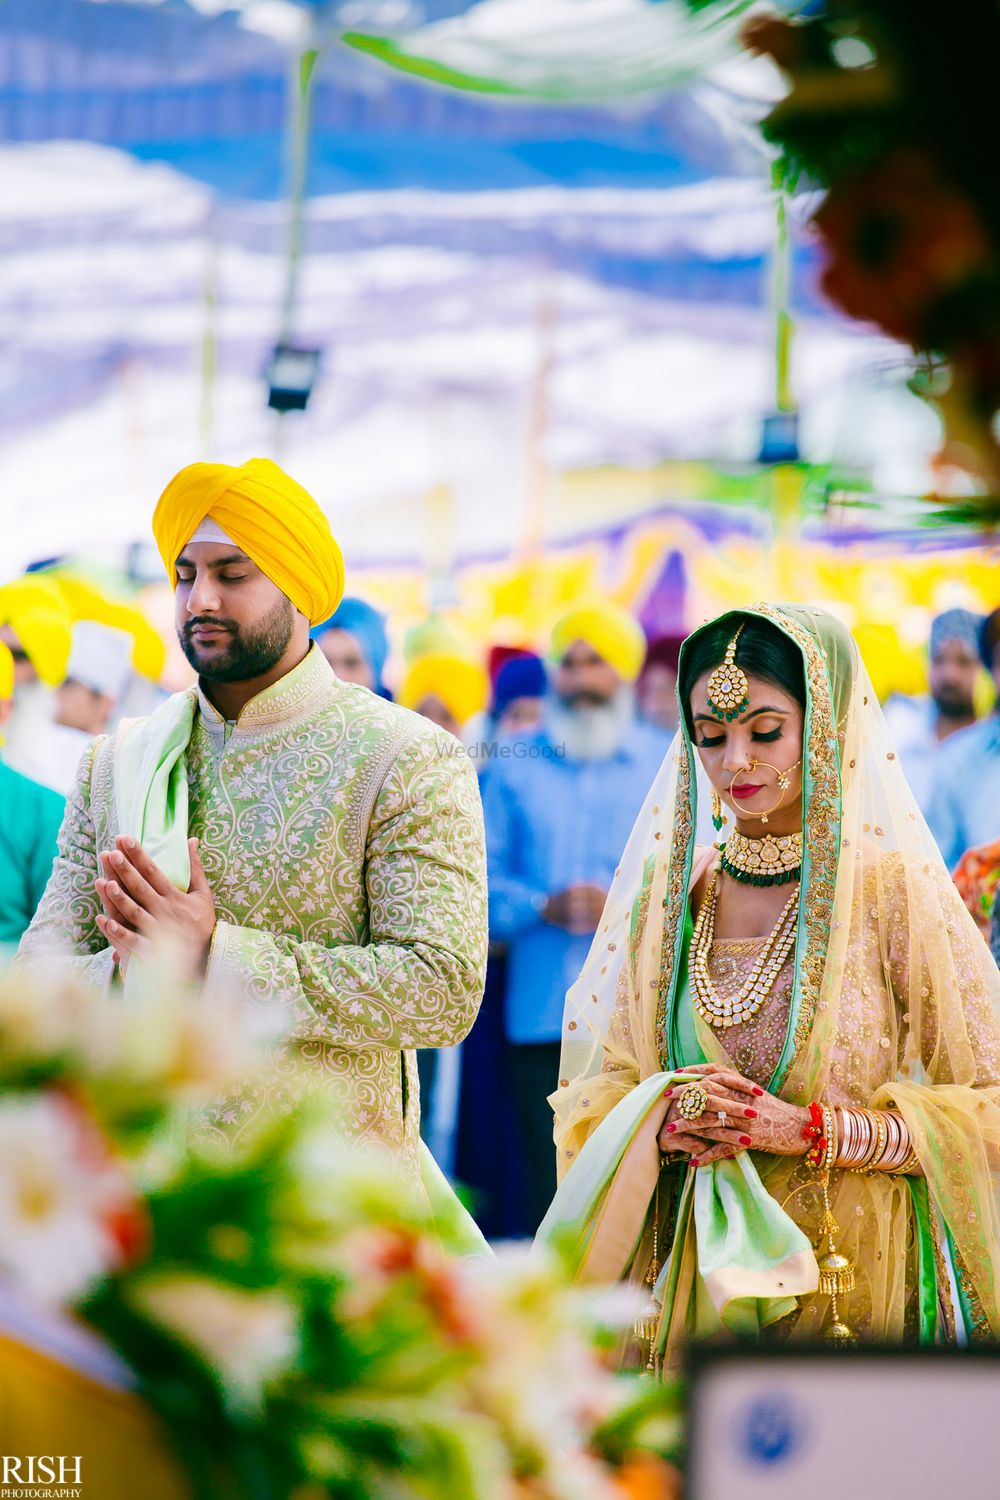 Photo of Sikh wedding with bride and groom in unique colours